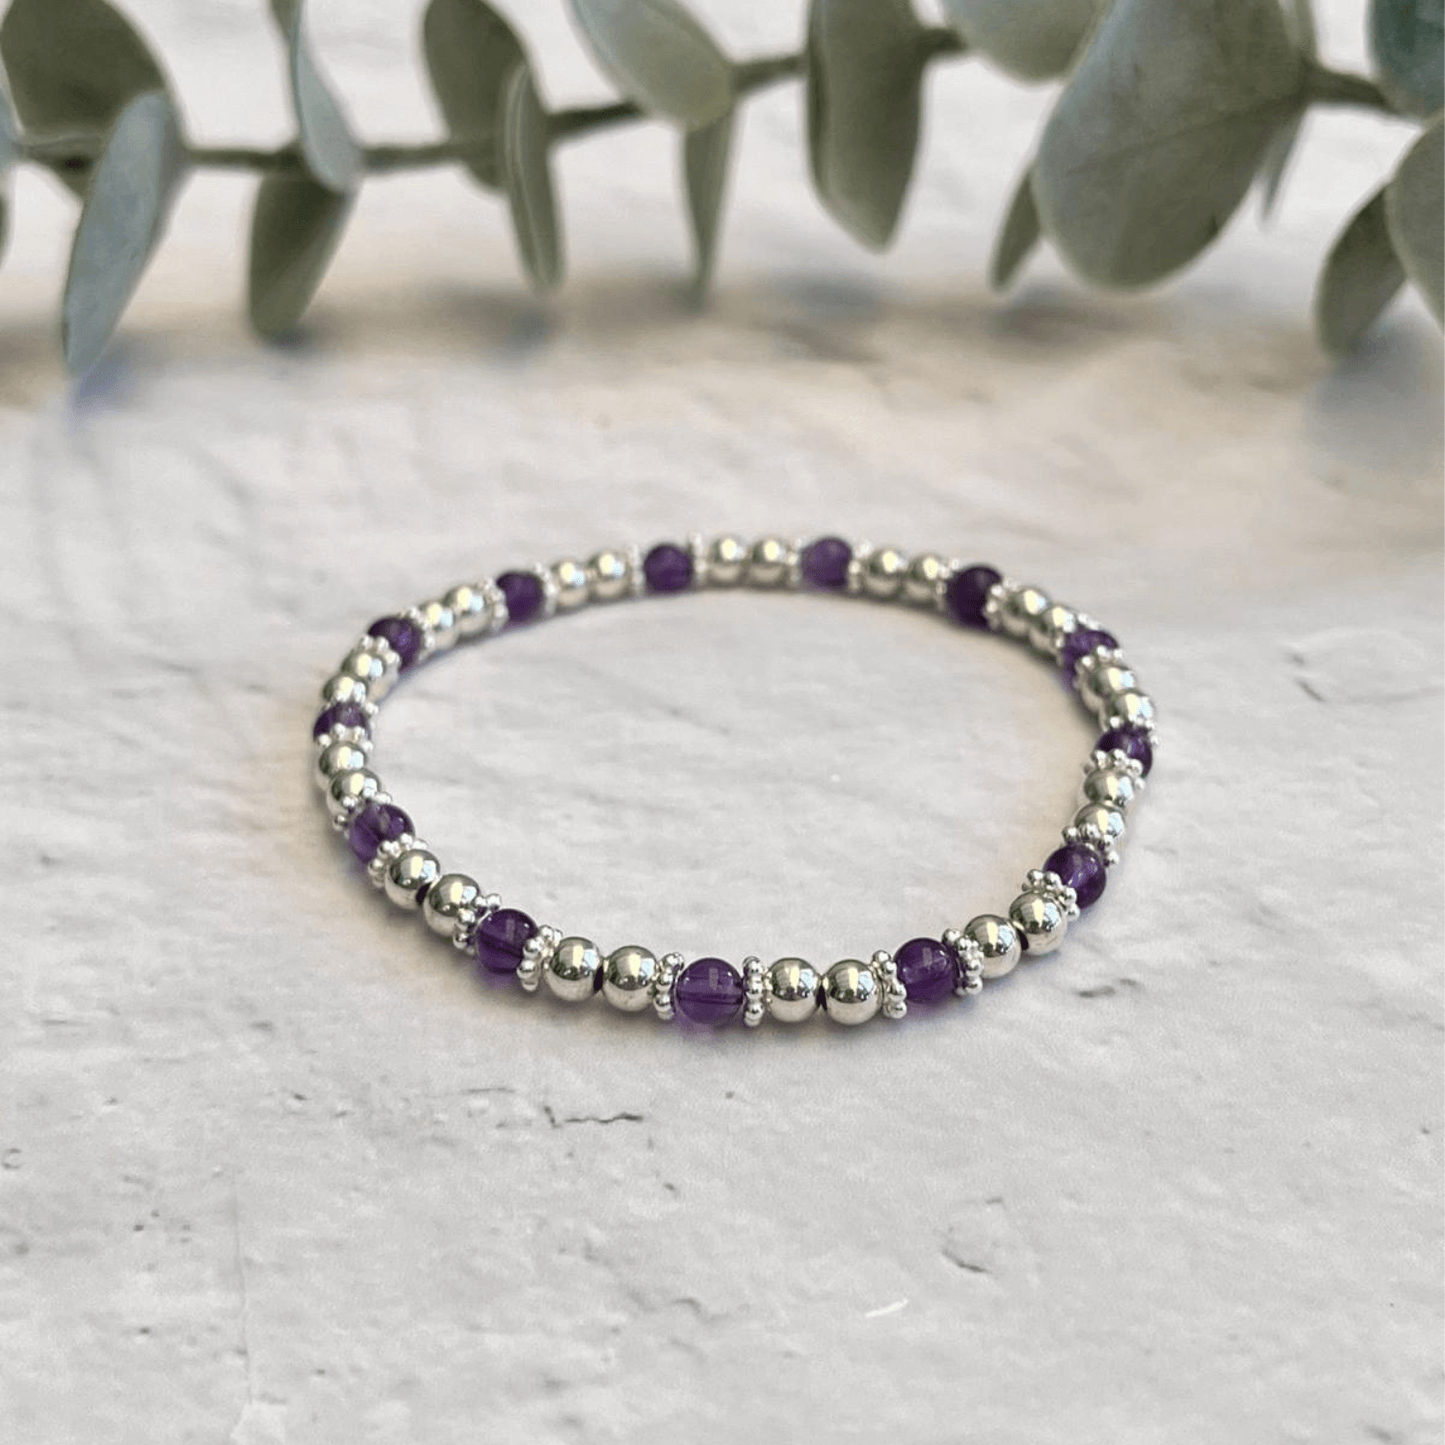 A delicate Dainty Amethyst Bracelet by Made Here with Love sits on a textured white surface, featuring alternating small sterling silver beads and vibrant amethyst gemstones. In the background, blurred green eucalyptus leaves provide a natural backdrop, highlighting this piece of handcrafted jewelry.